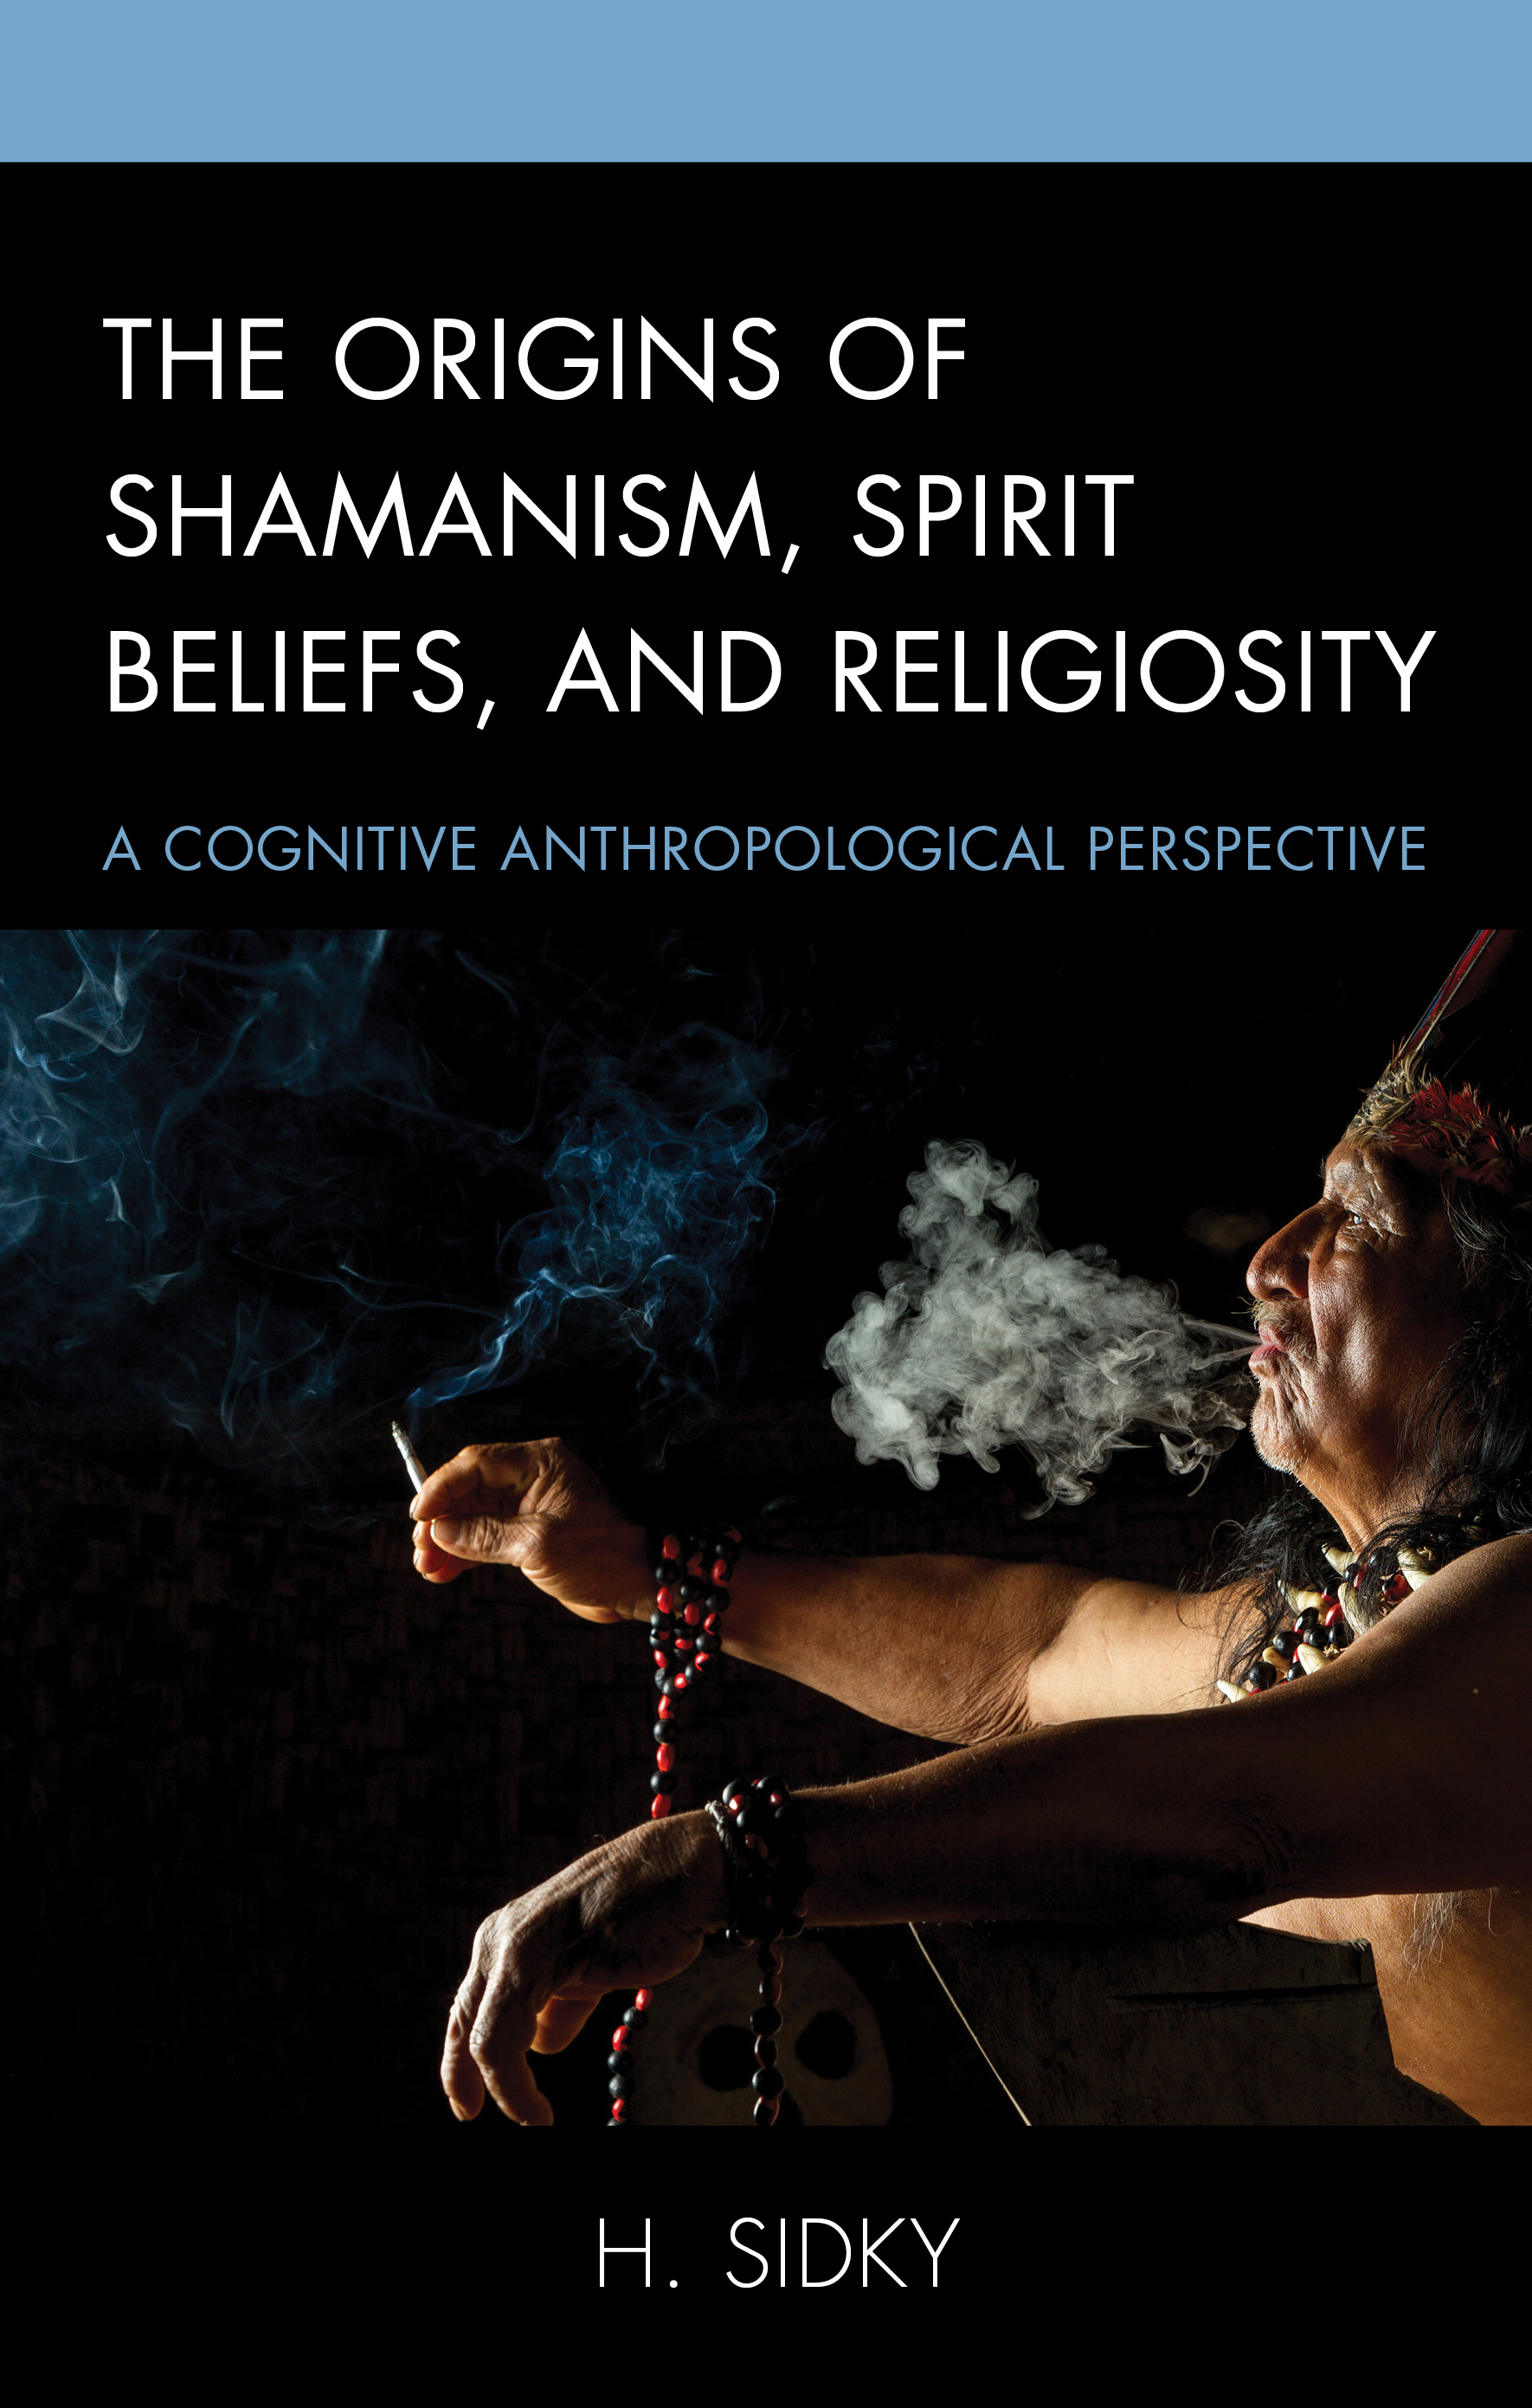 The Origins of Shamanism, Spirit Beliefs, and Religiosity: A Cognitive Anthropological Perspective